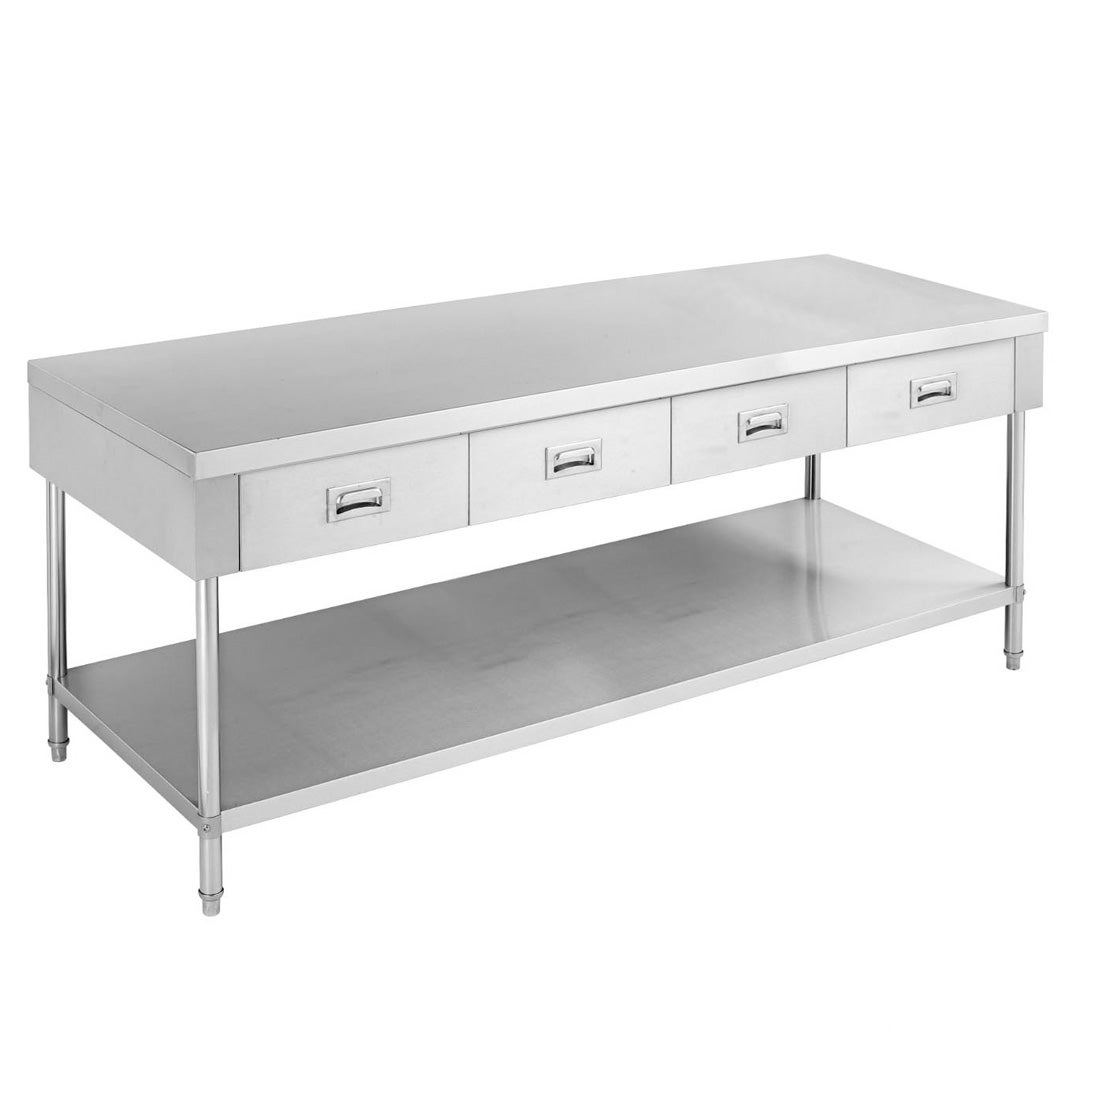 Comchef SWBD-6-1800 Work bench with 4 Drawers and Undershelf